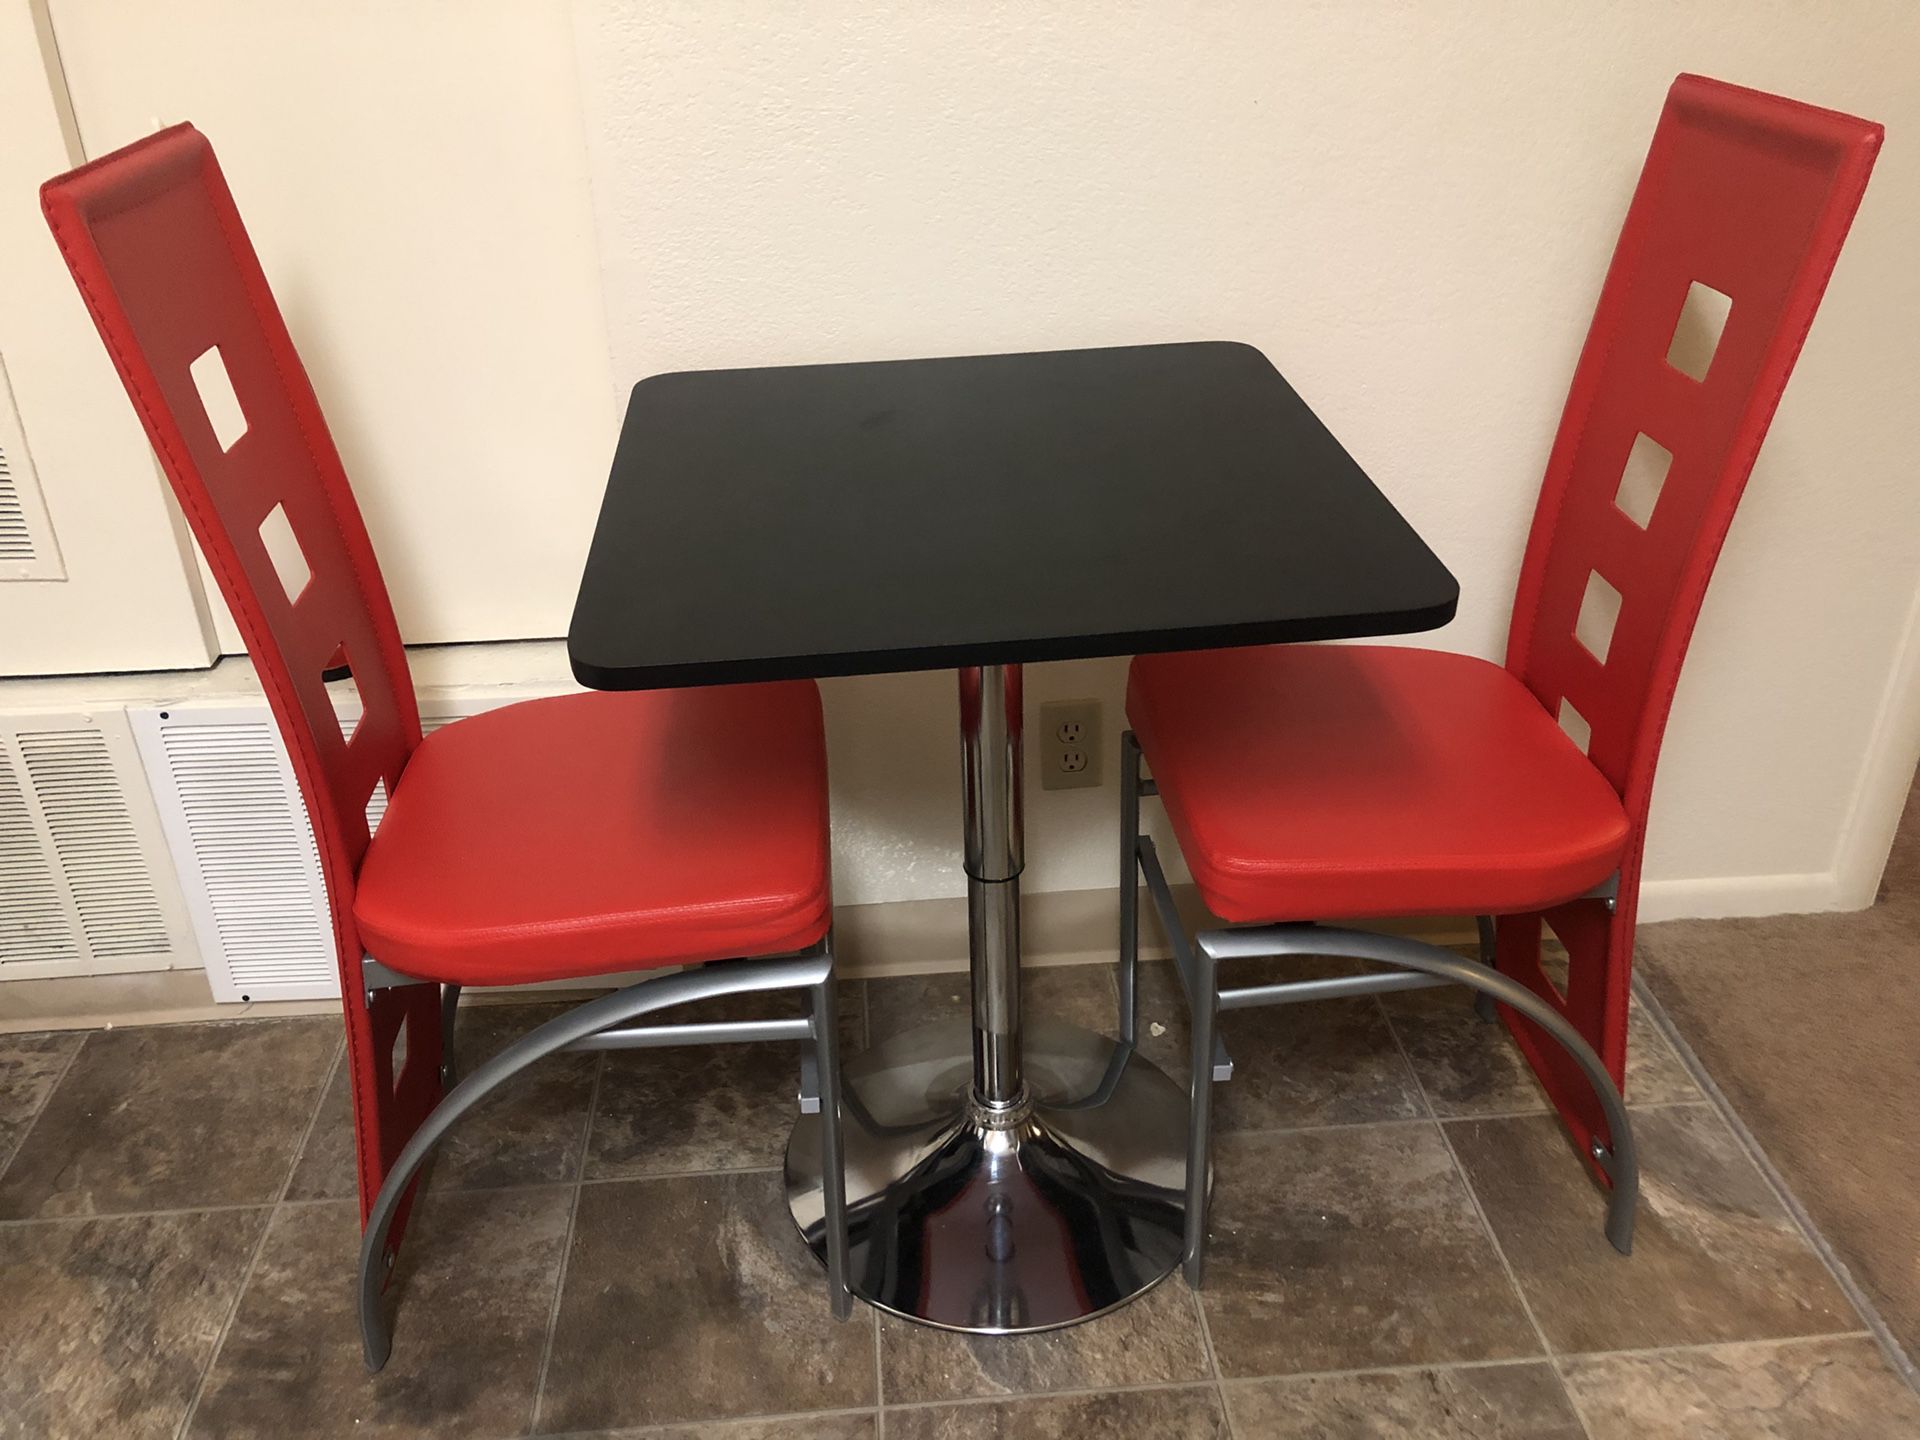 Square Table and 2 chairs